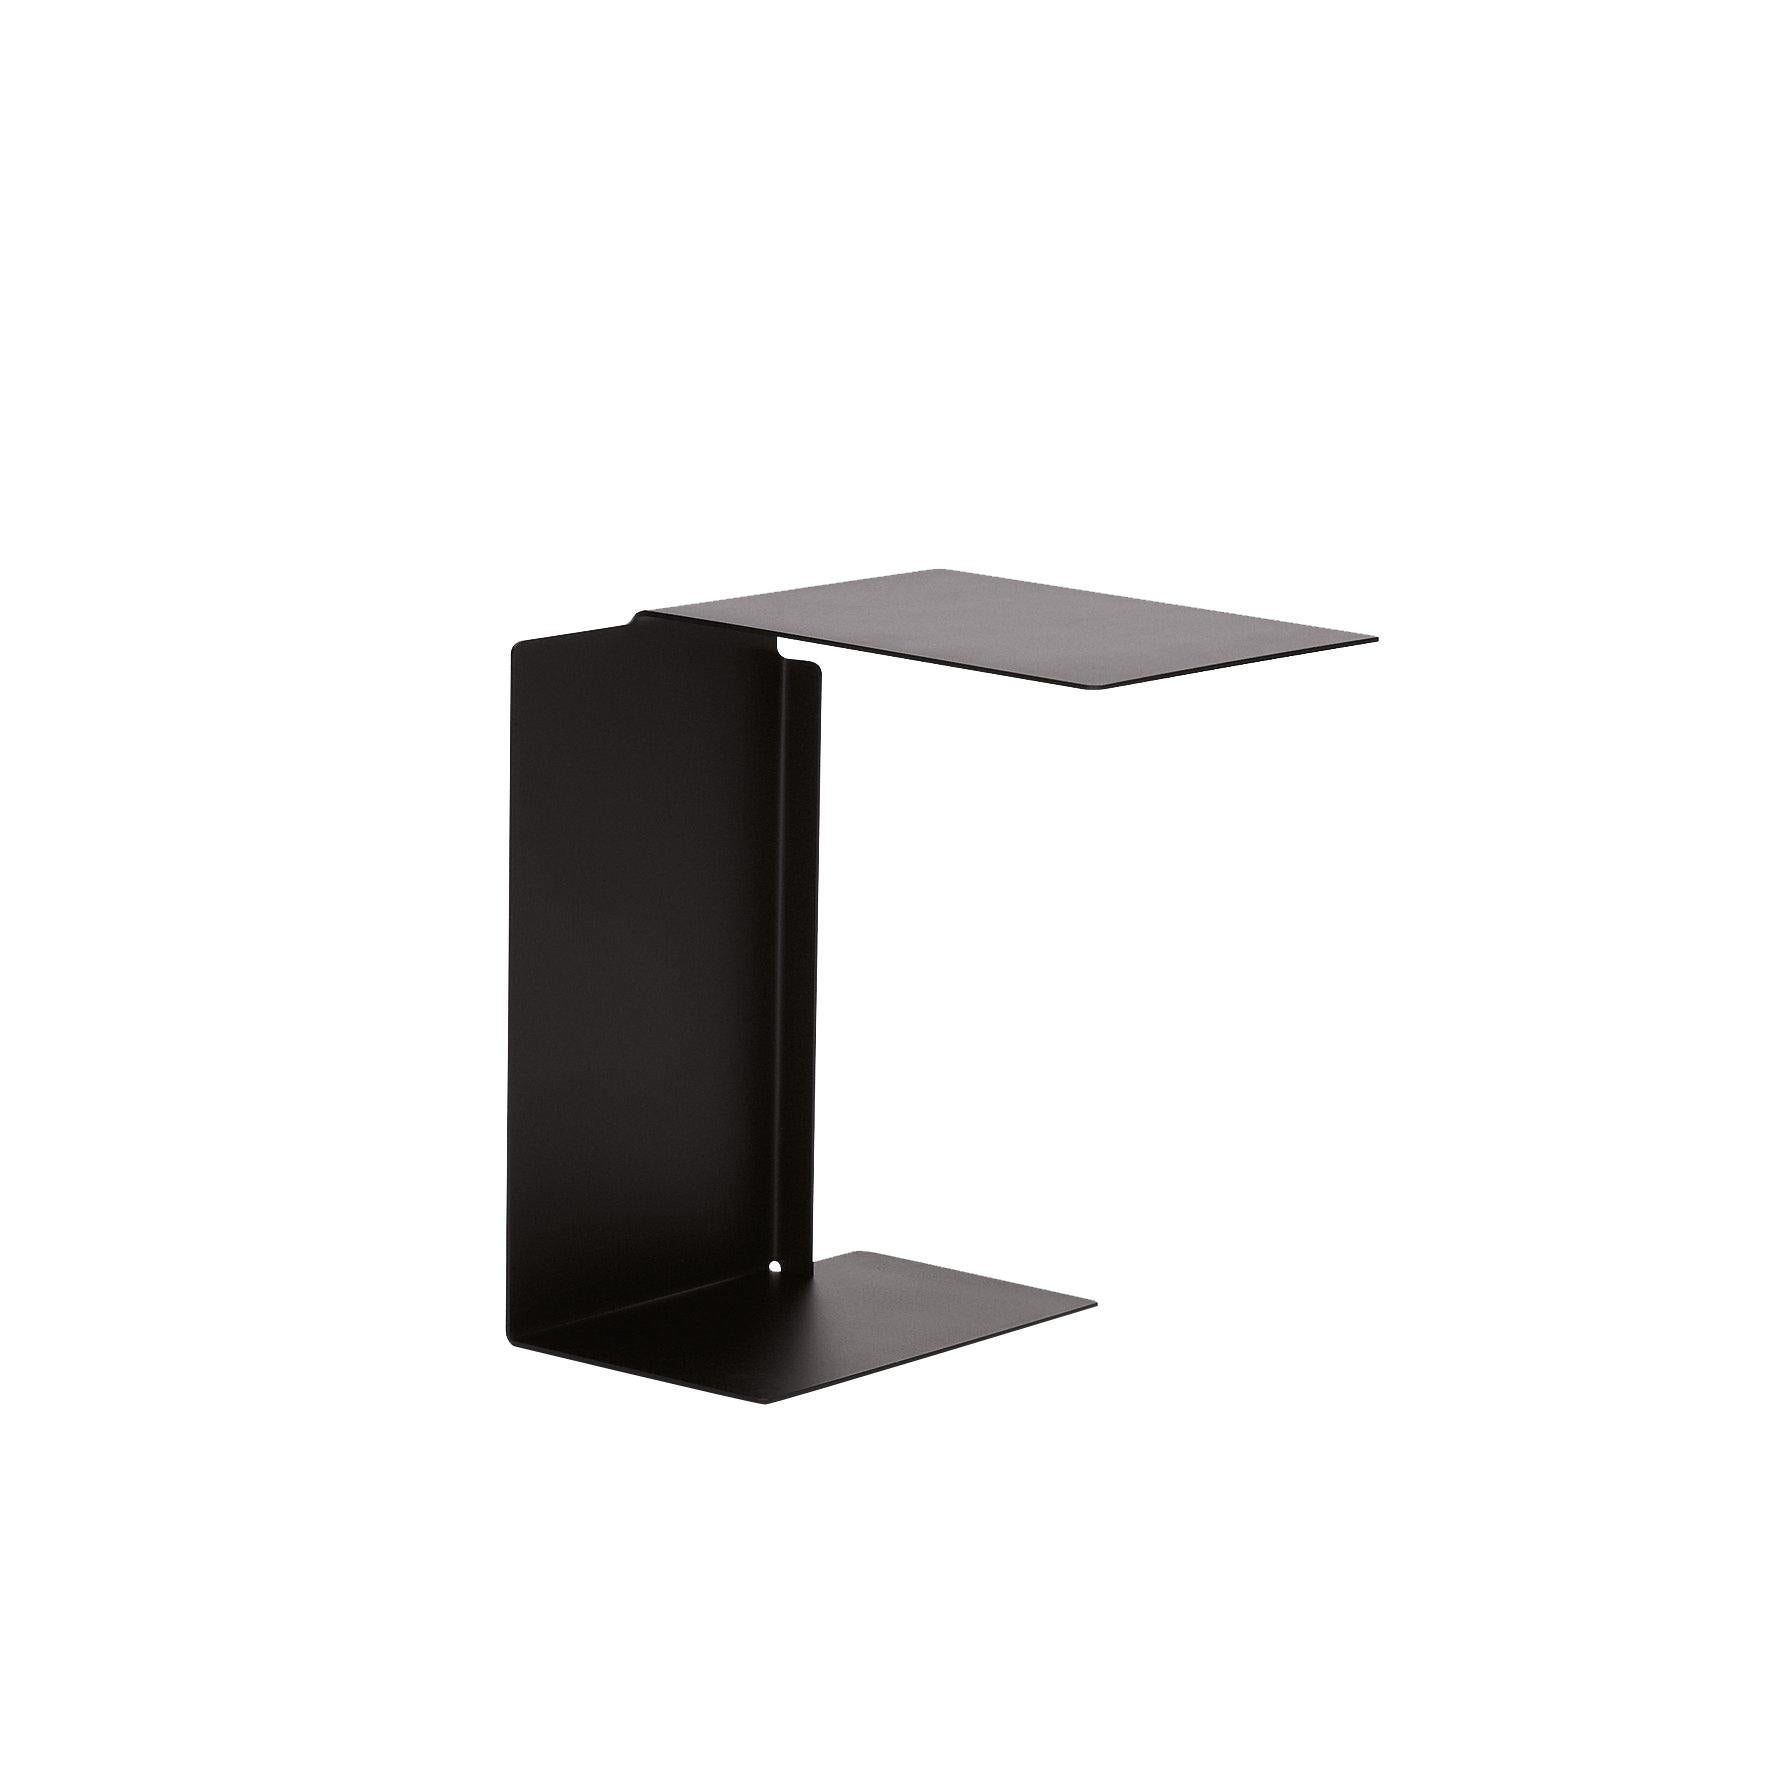 ClassiCon Diana B Side Table in Black by Konstantin Grcic